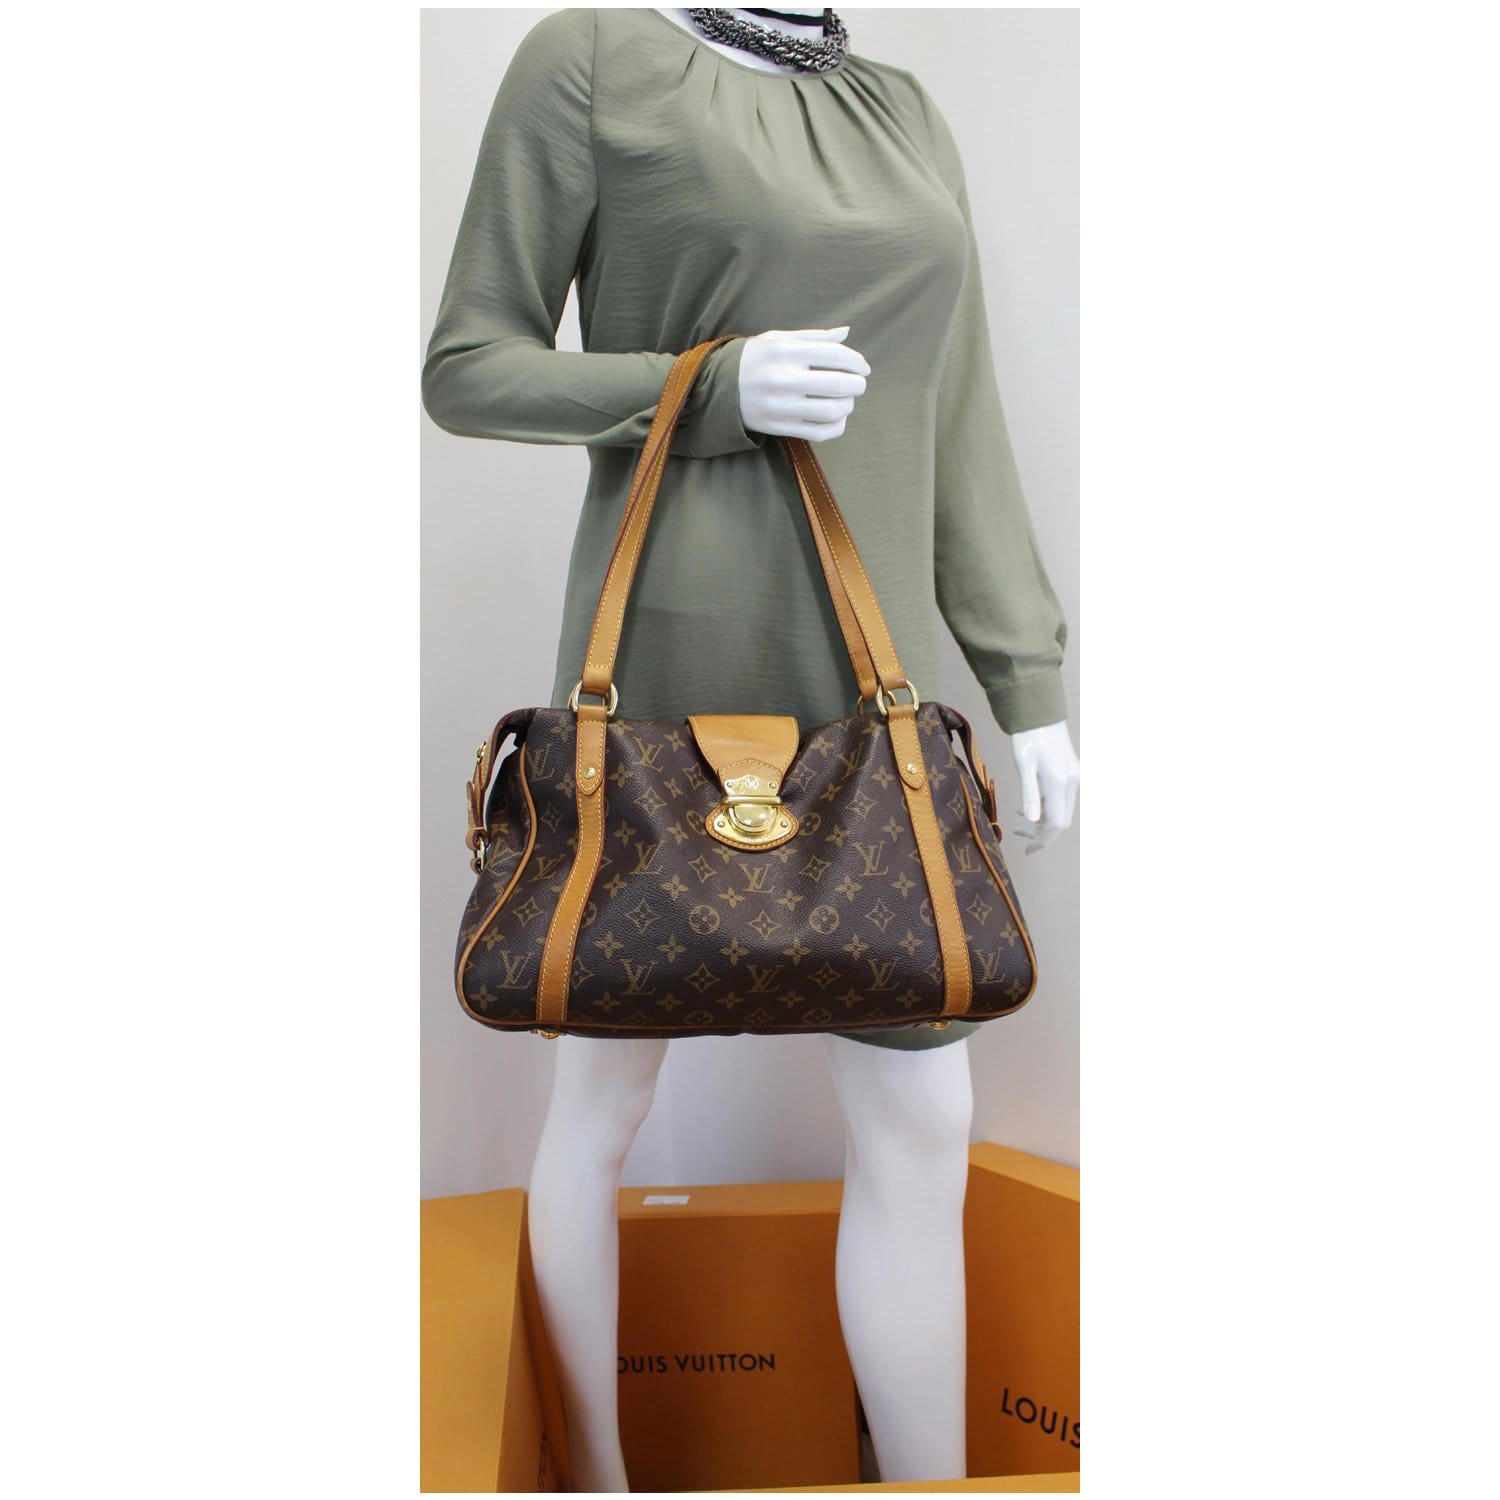 Boutiques That Sell Louis Vuitton Spain, SAVE 58% 